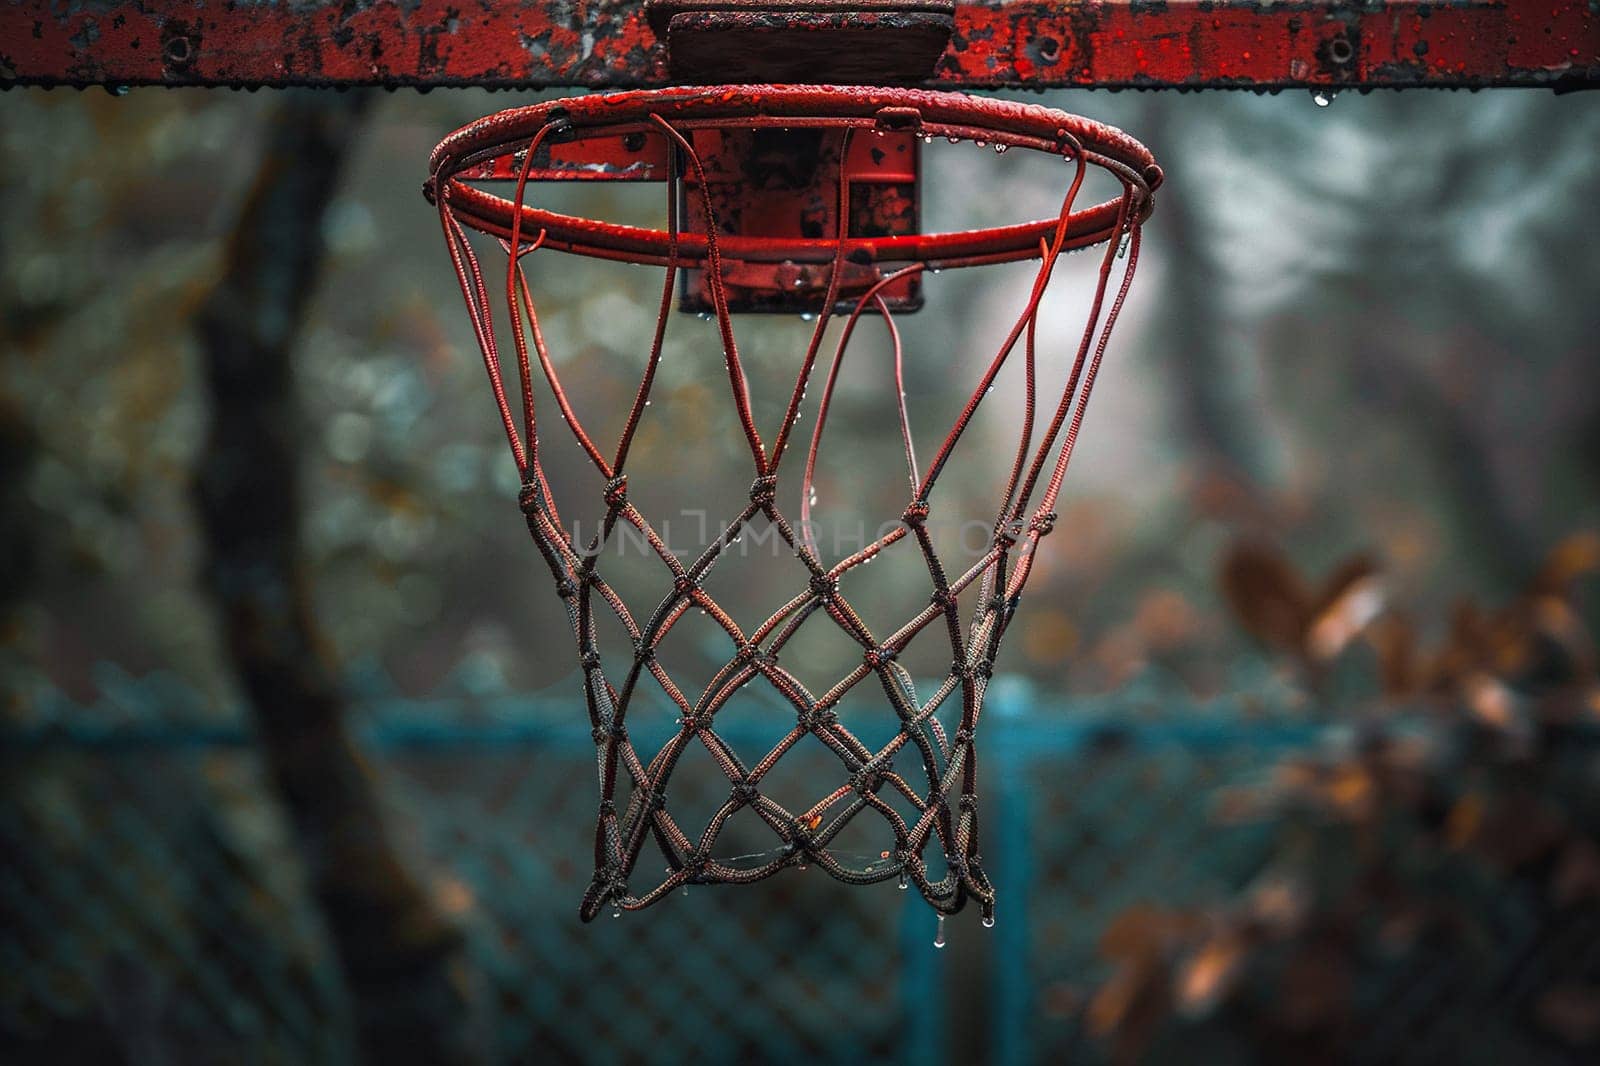 Close-up of a basketball hoop on a street court in autumn.